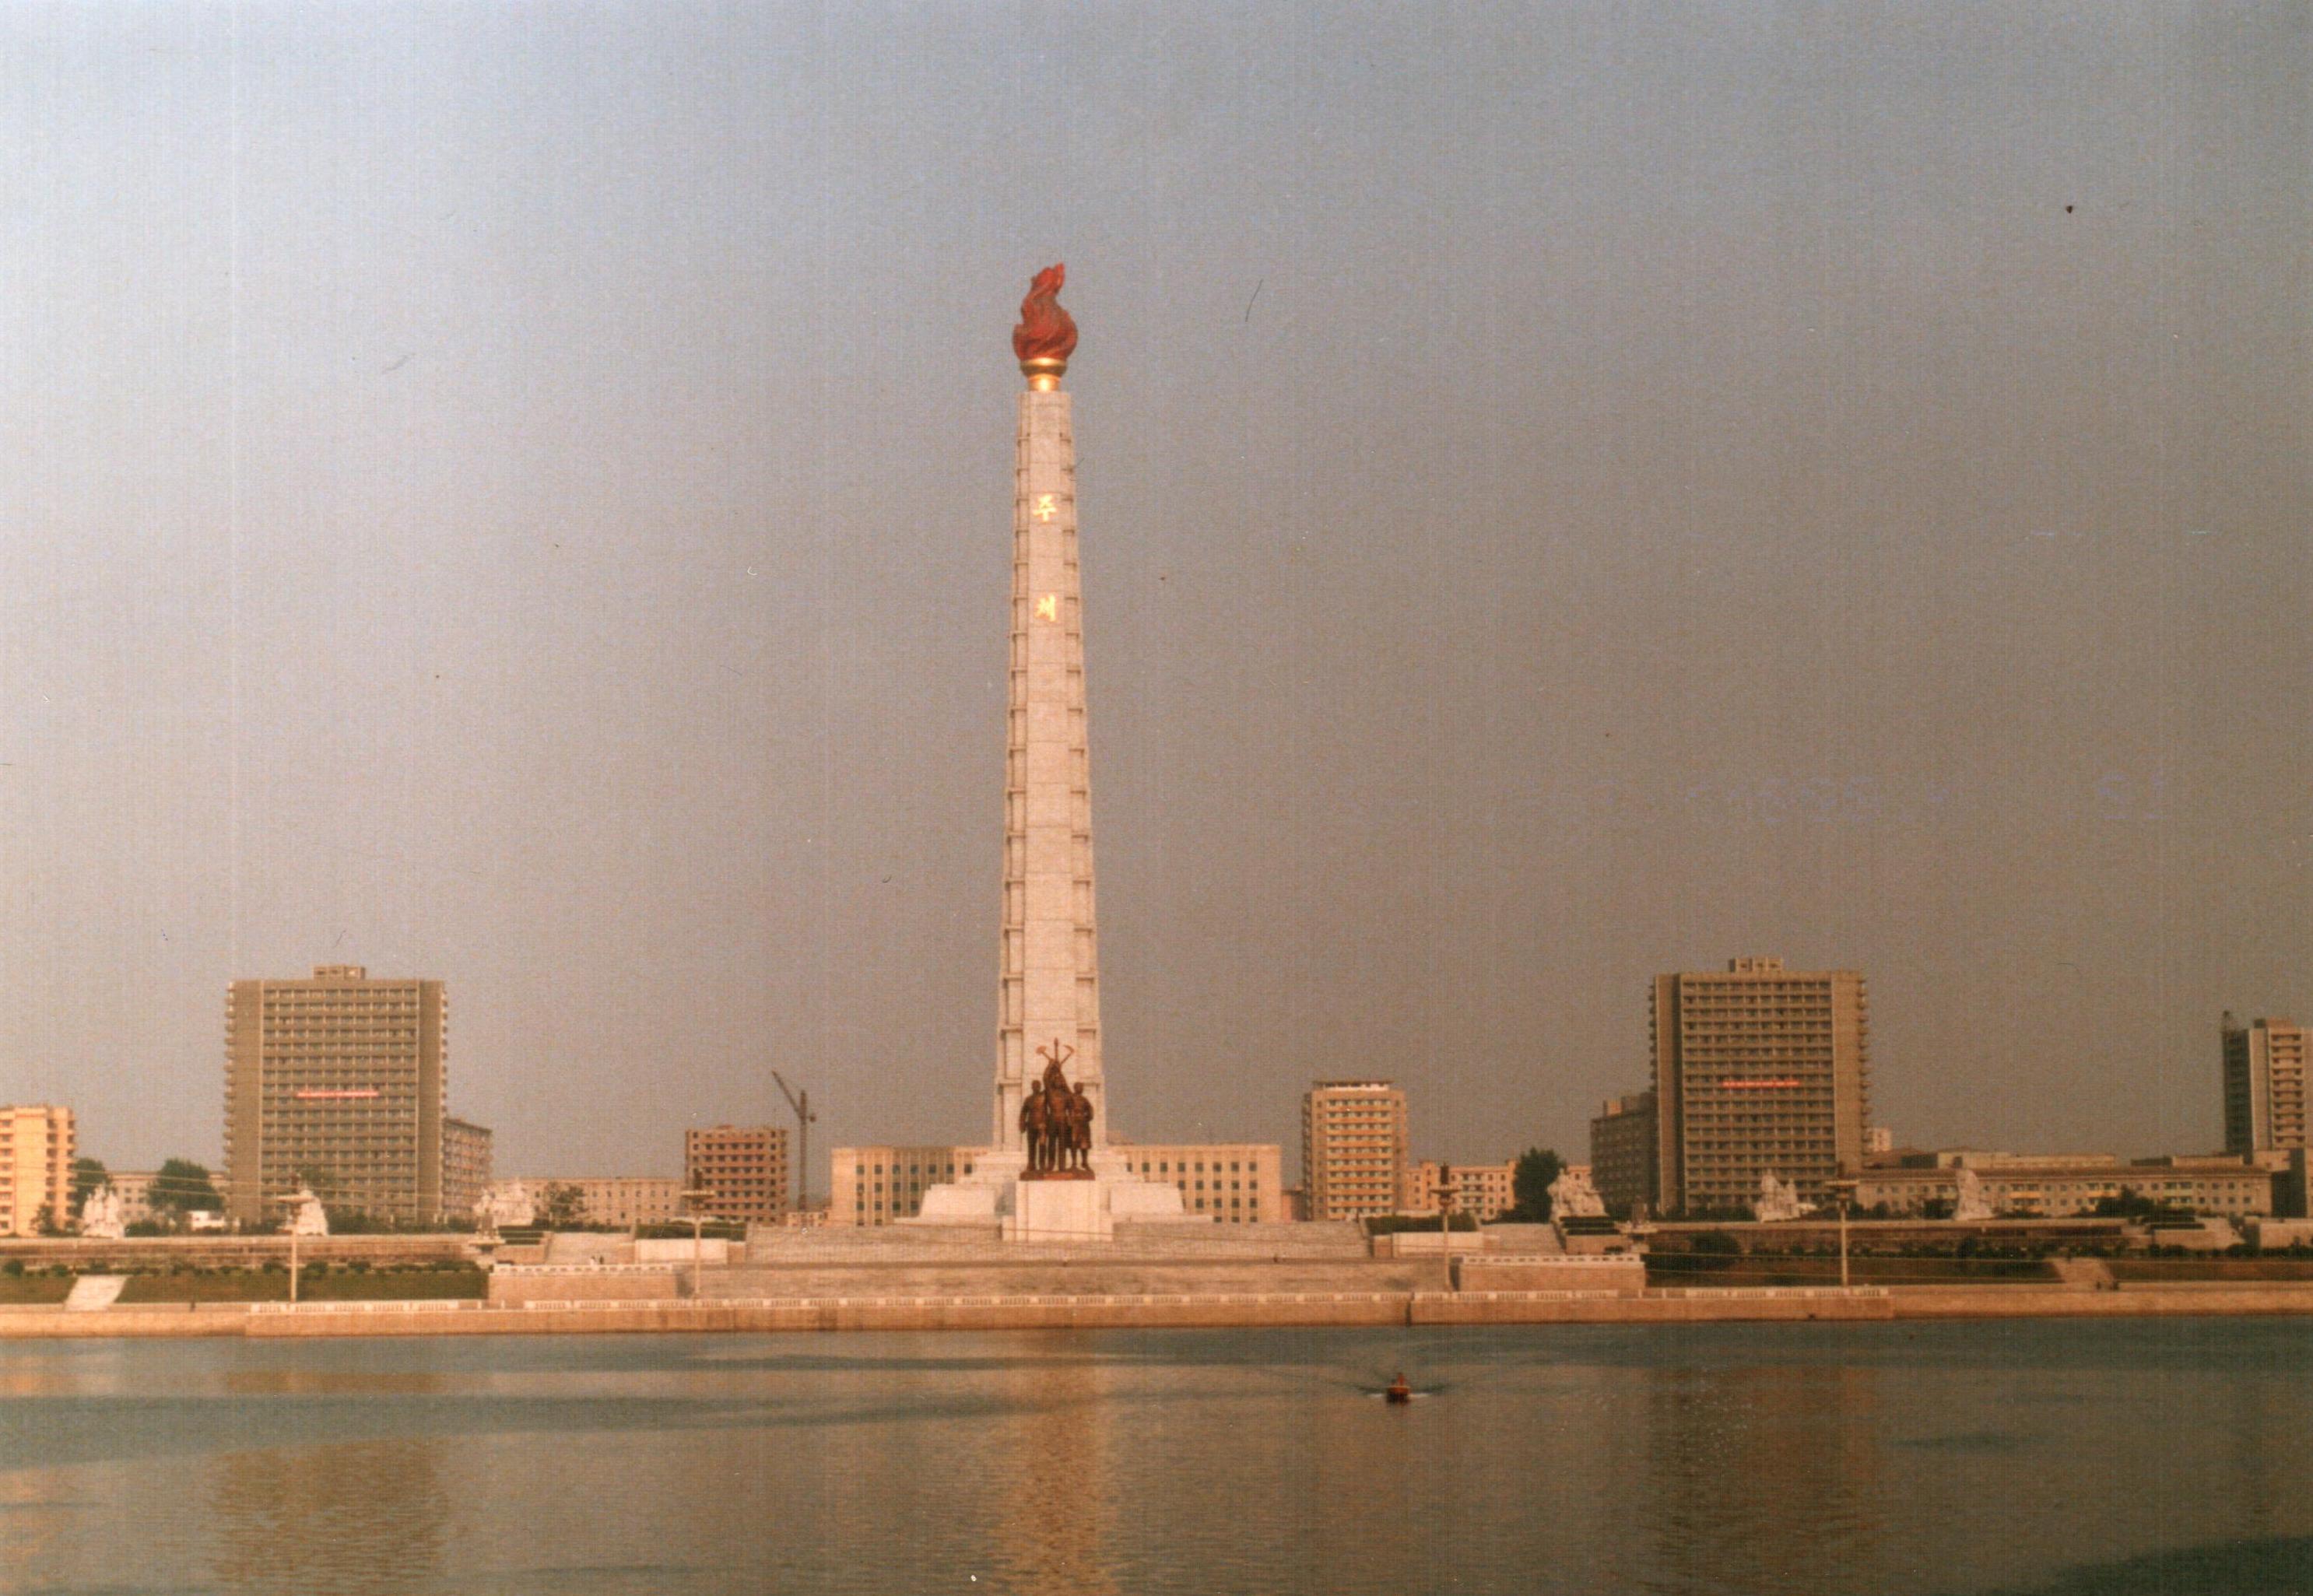 Amazing Juche Tower Pictures & Backgrounds